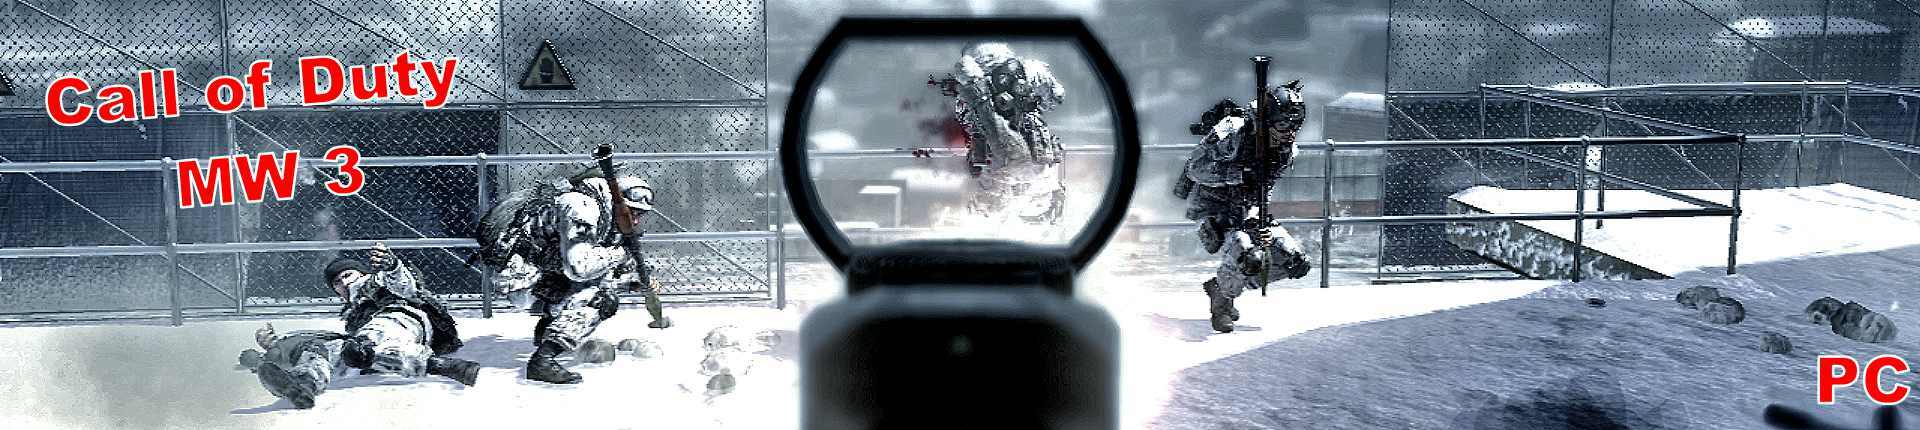 Download highly compressed setup or RAR of Call of Duty Modern Warfare 3 for pc in 5.48 GB from here – 1 GB part wise